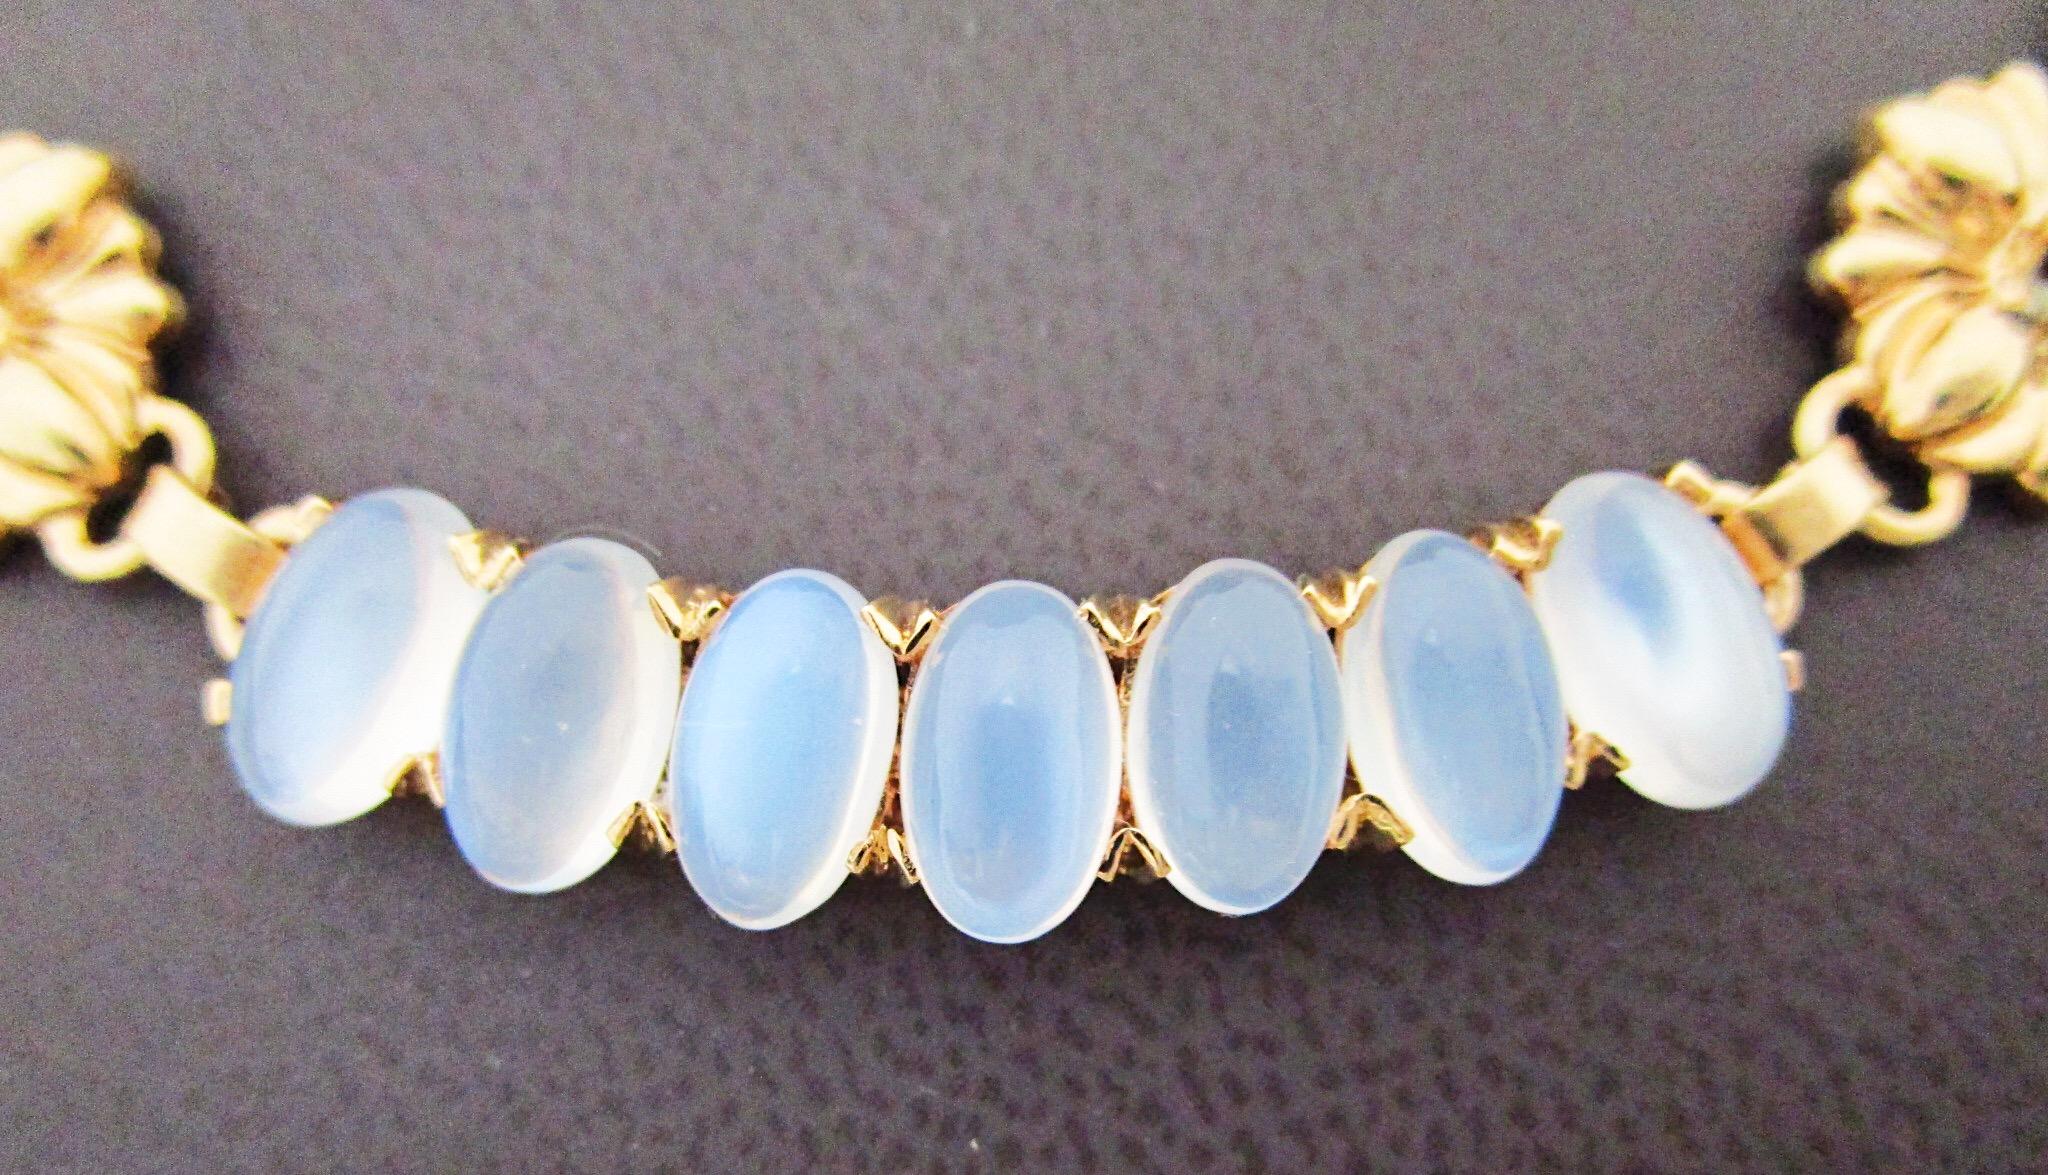 This necklace is delicate and dignified. The two Montana sapphires anchor a strand of glowing Moonstones all set in 14K yellow gold. Add a touch of classy-chicness to any ensemble.   Don't let this beauty pass you by.

St. John and Myers Jewelry is